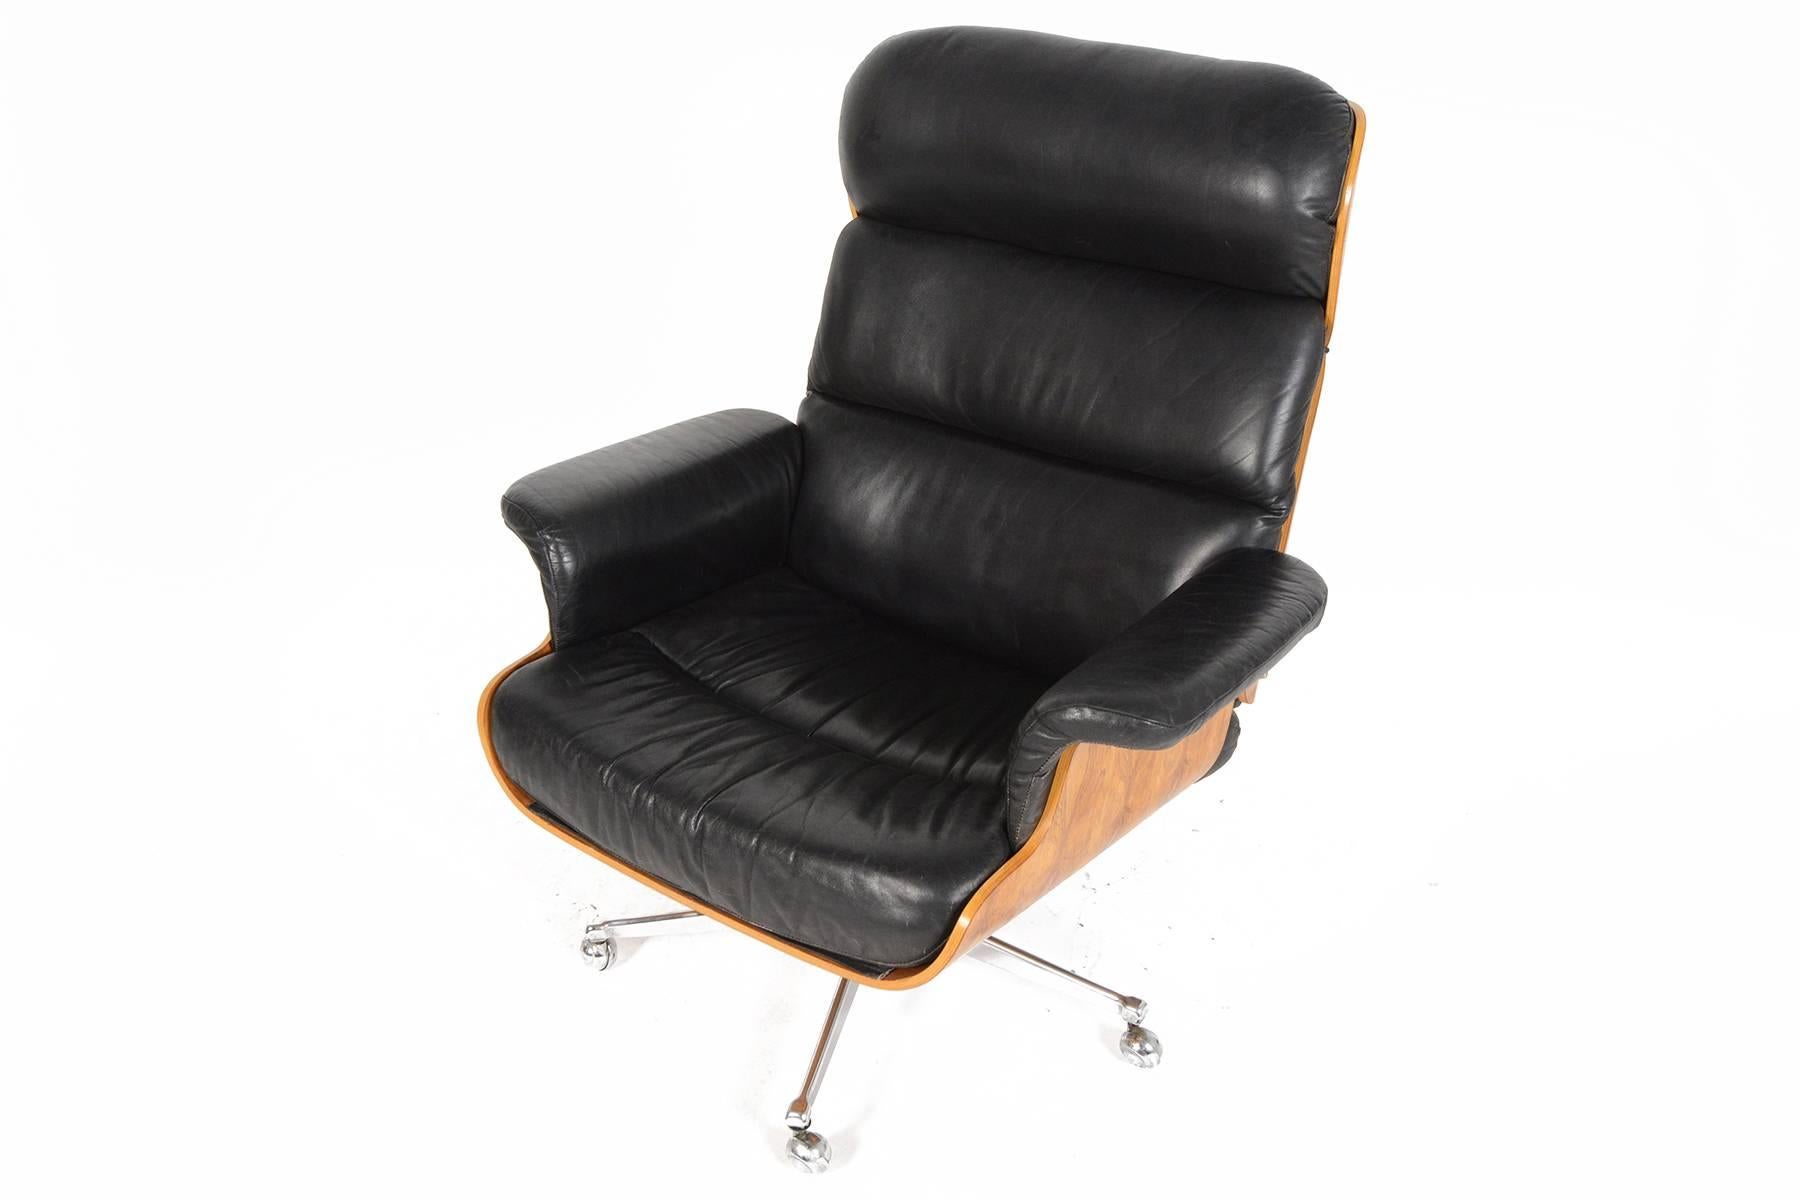 20th Century Martin Stoll Rosewood and Leather Swivel Chair with Ottoman